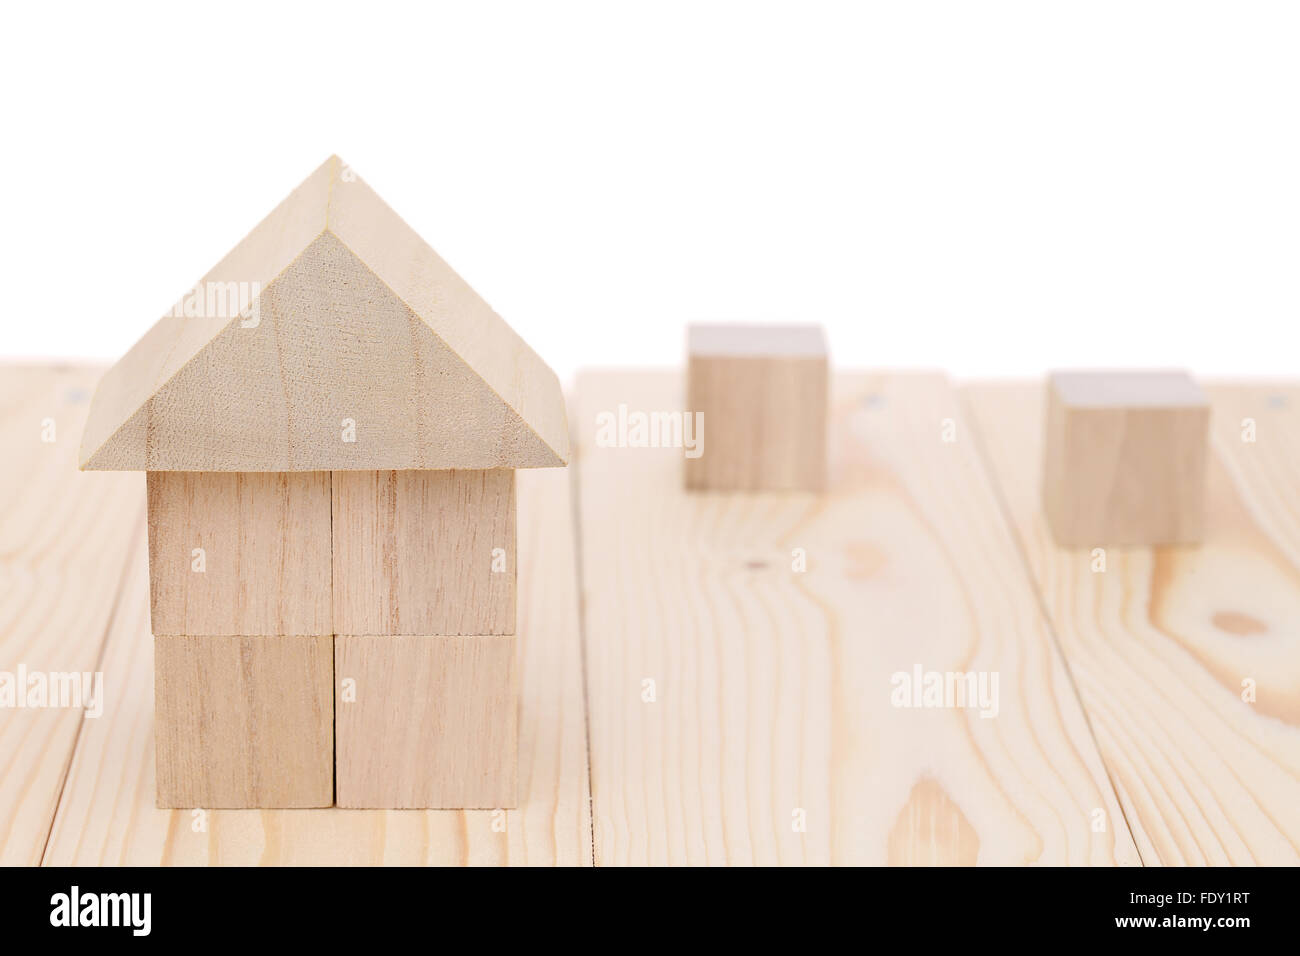 Wooden toy house with natural colored toy blocks Stock Photo